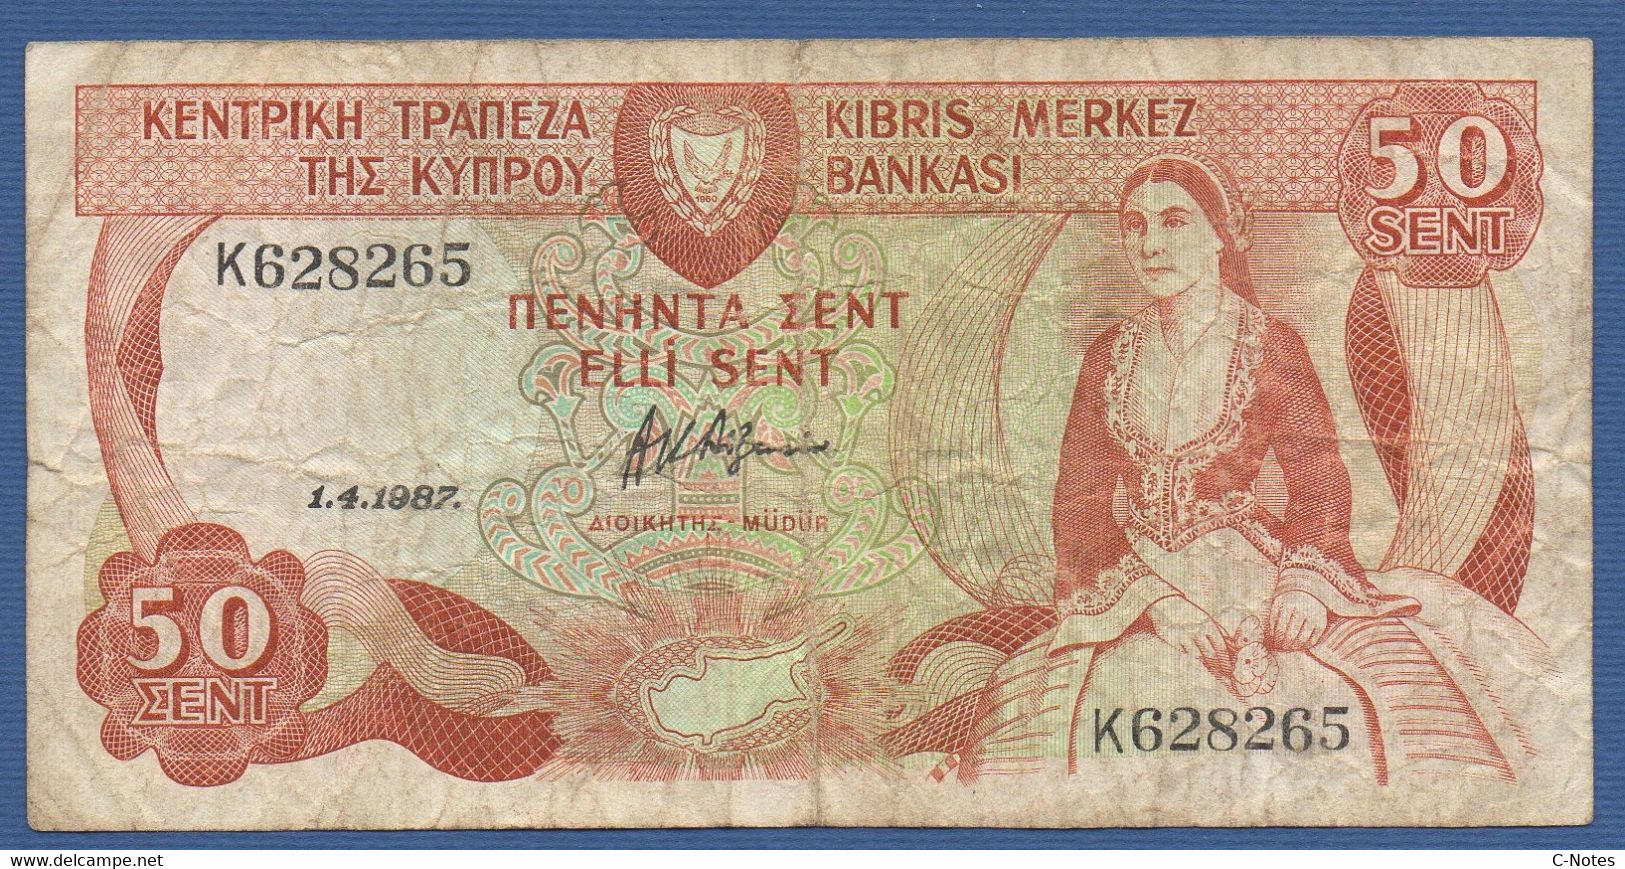 CYPRUS - P.52a – 50 Cents / Sent 01.04.1987 Circulated Serie K628265 - Chypre